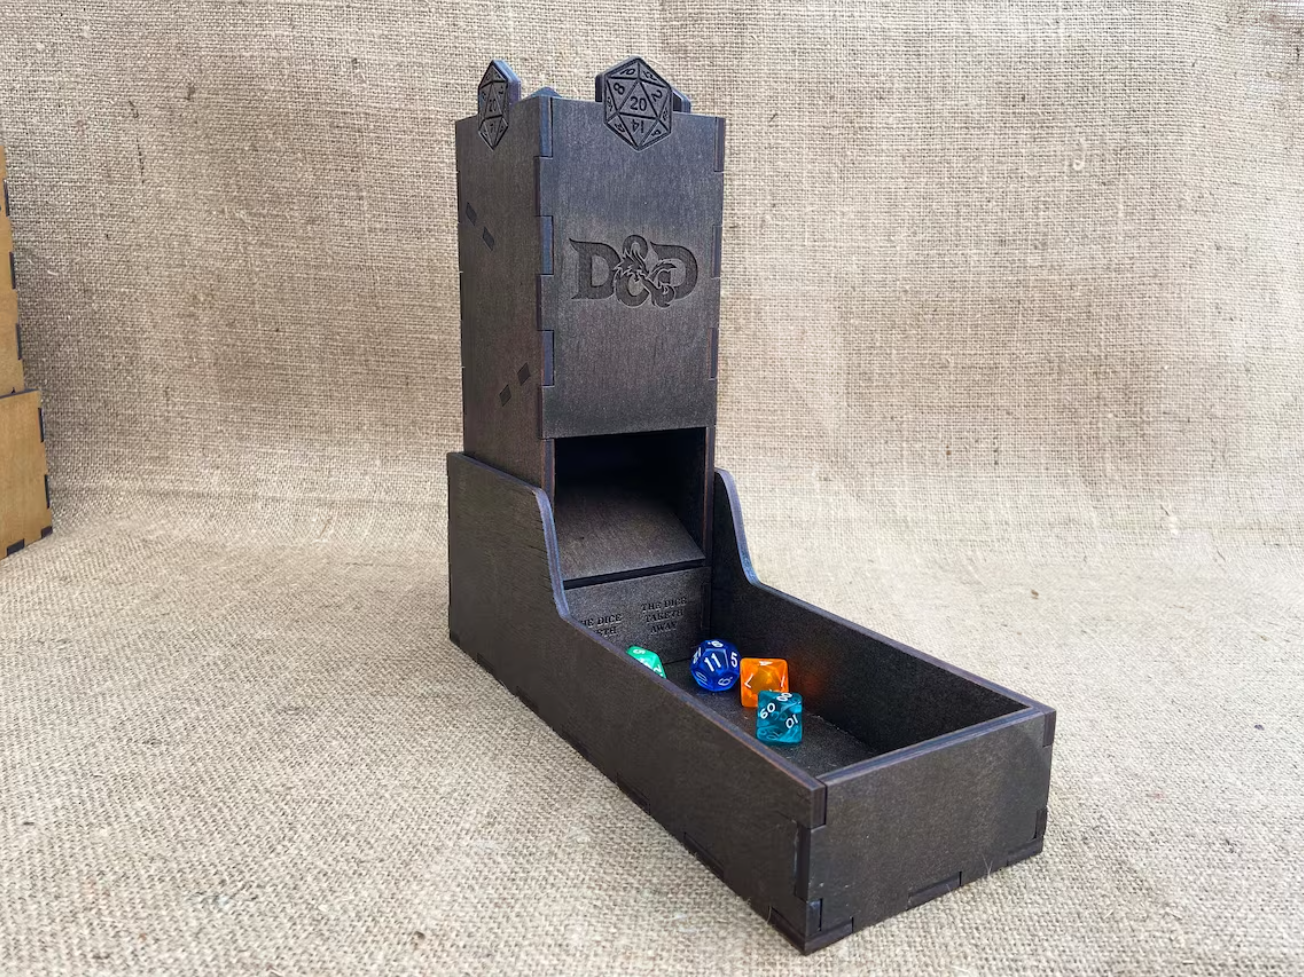 Dice tower wood, Dnd dice tower and tray, Dice towers - GravisCup